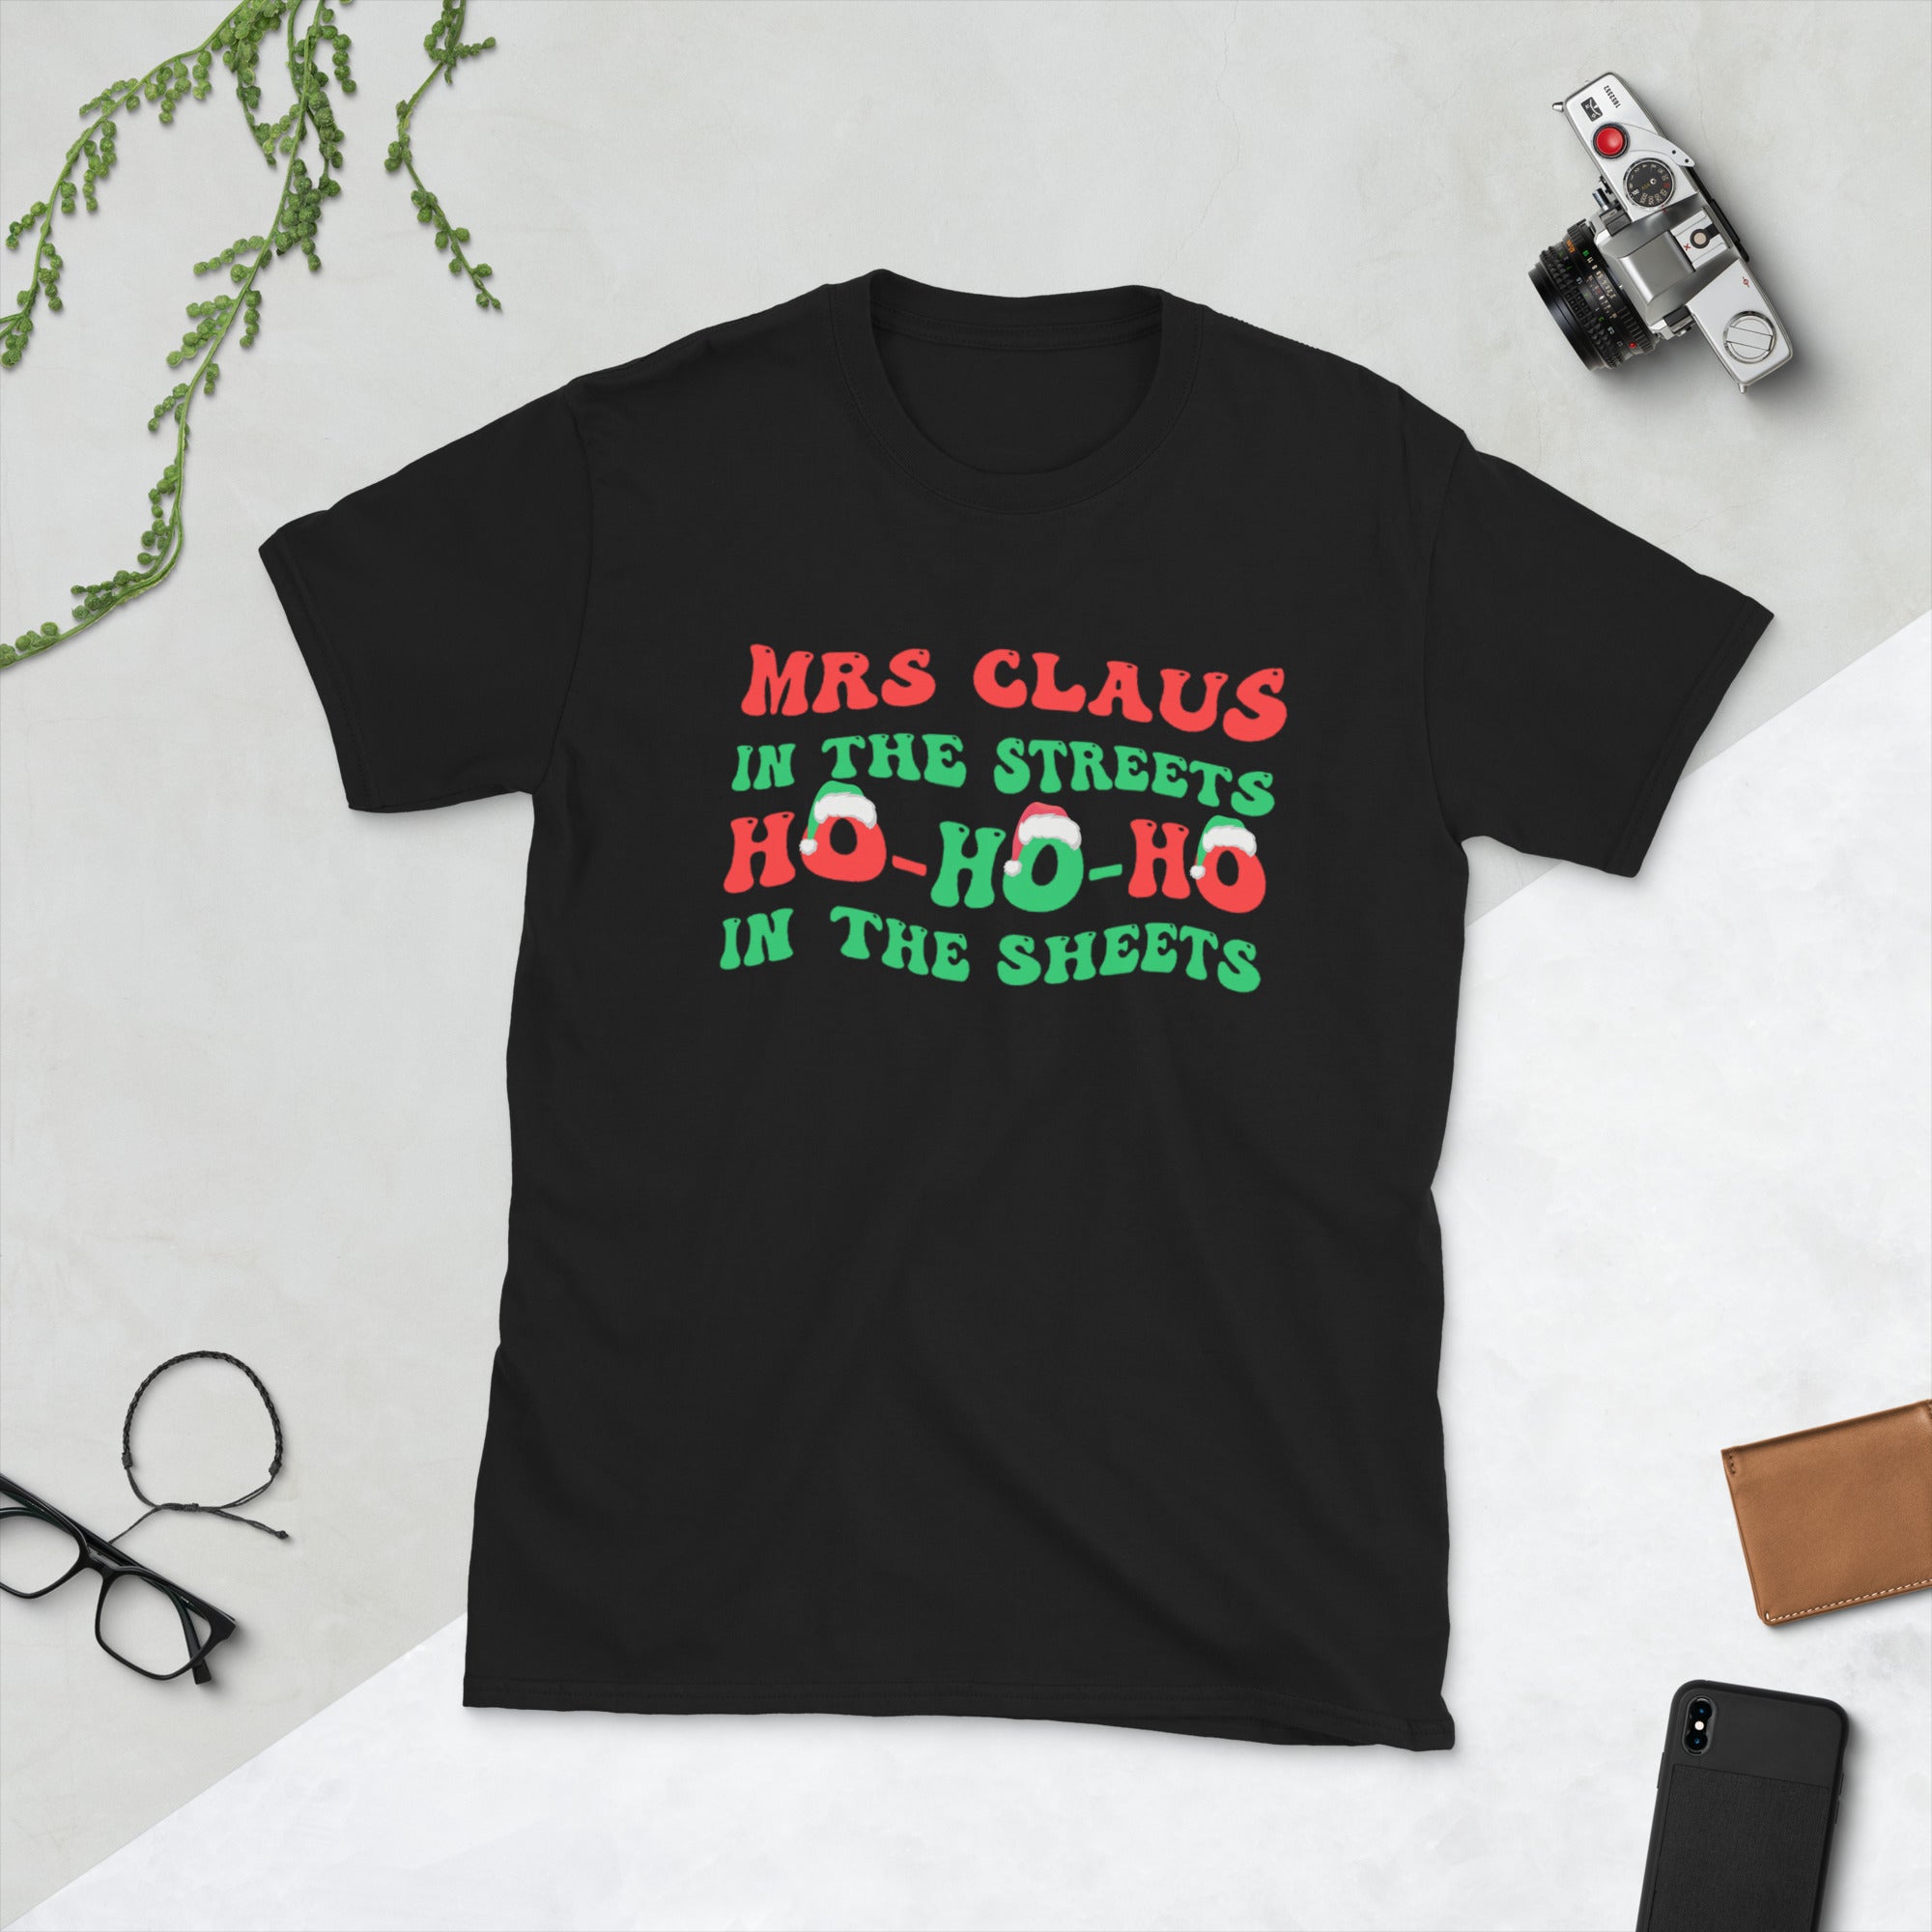 Mrs Claus In The Streets Ho Ho Ho In The Sheets, Funny Christmas, Mrs Claus Naughty Xmas Gifts Shirt